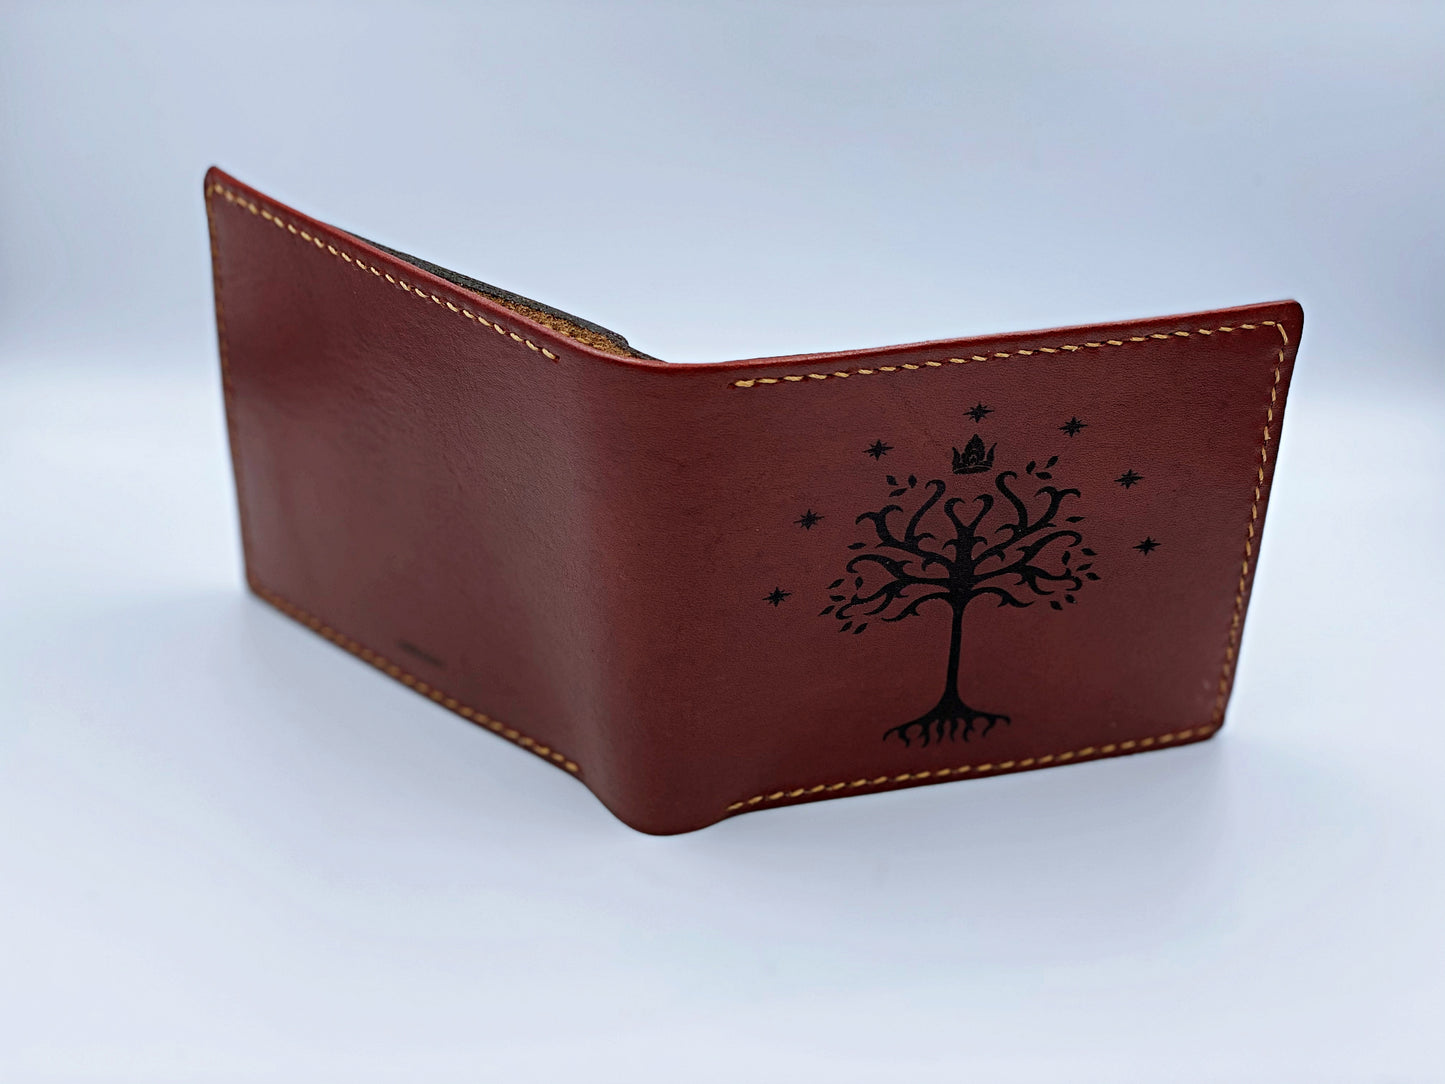 Mayan Corner - White Tree of Gondor - The Lord of the Rings men's wallet, personalized men's gifts, gift for him